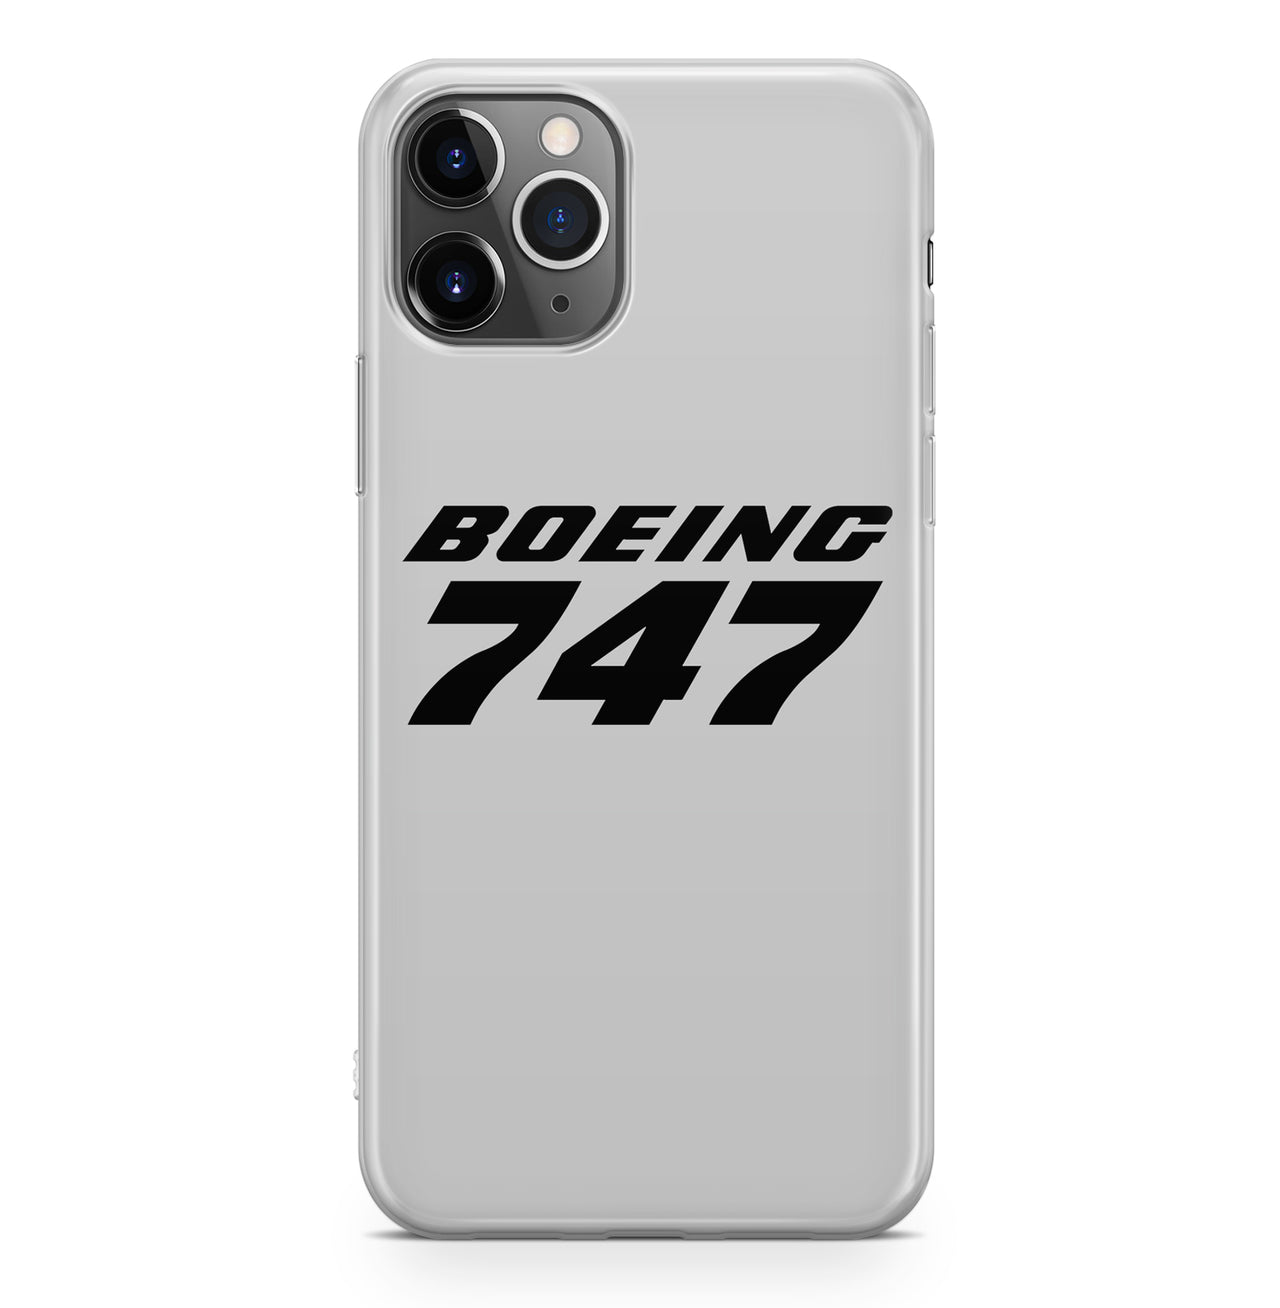 Boeing 747 & Text Designed iPhone Cases